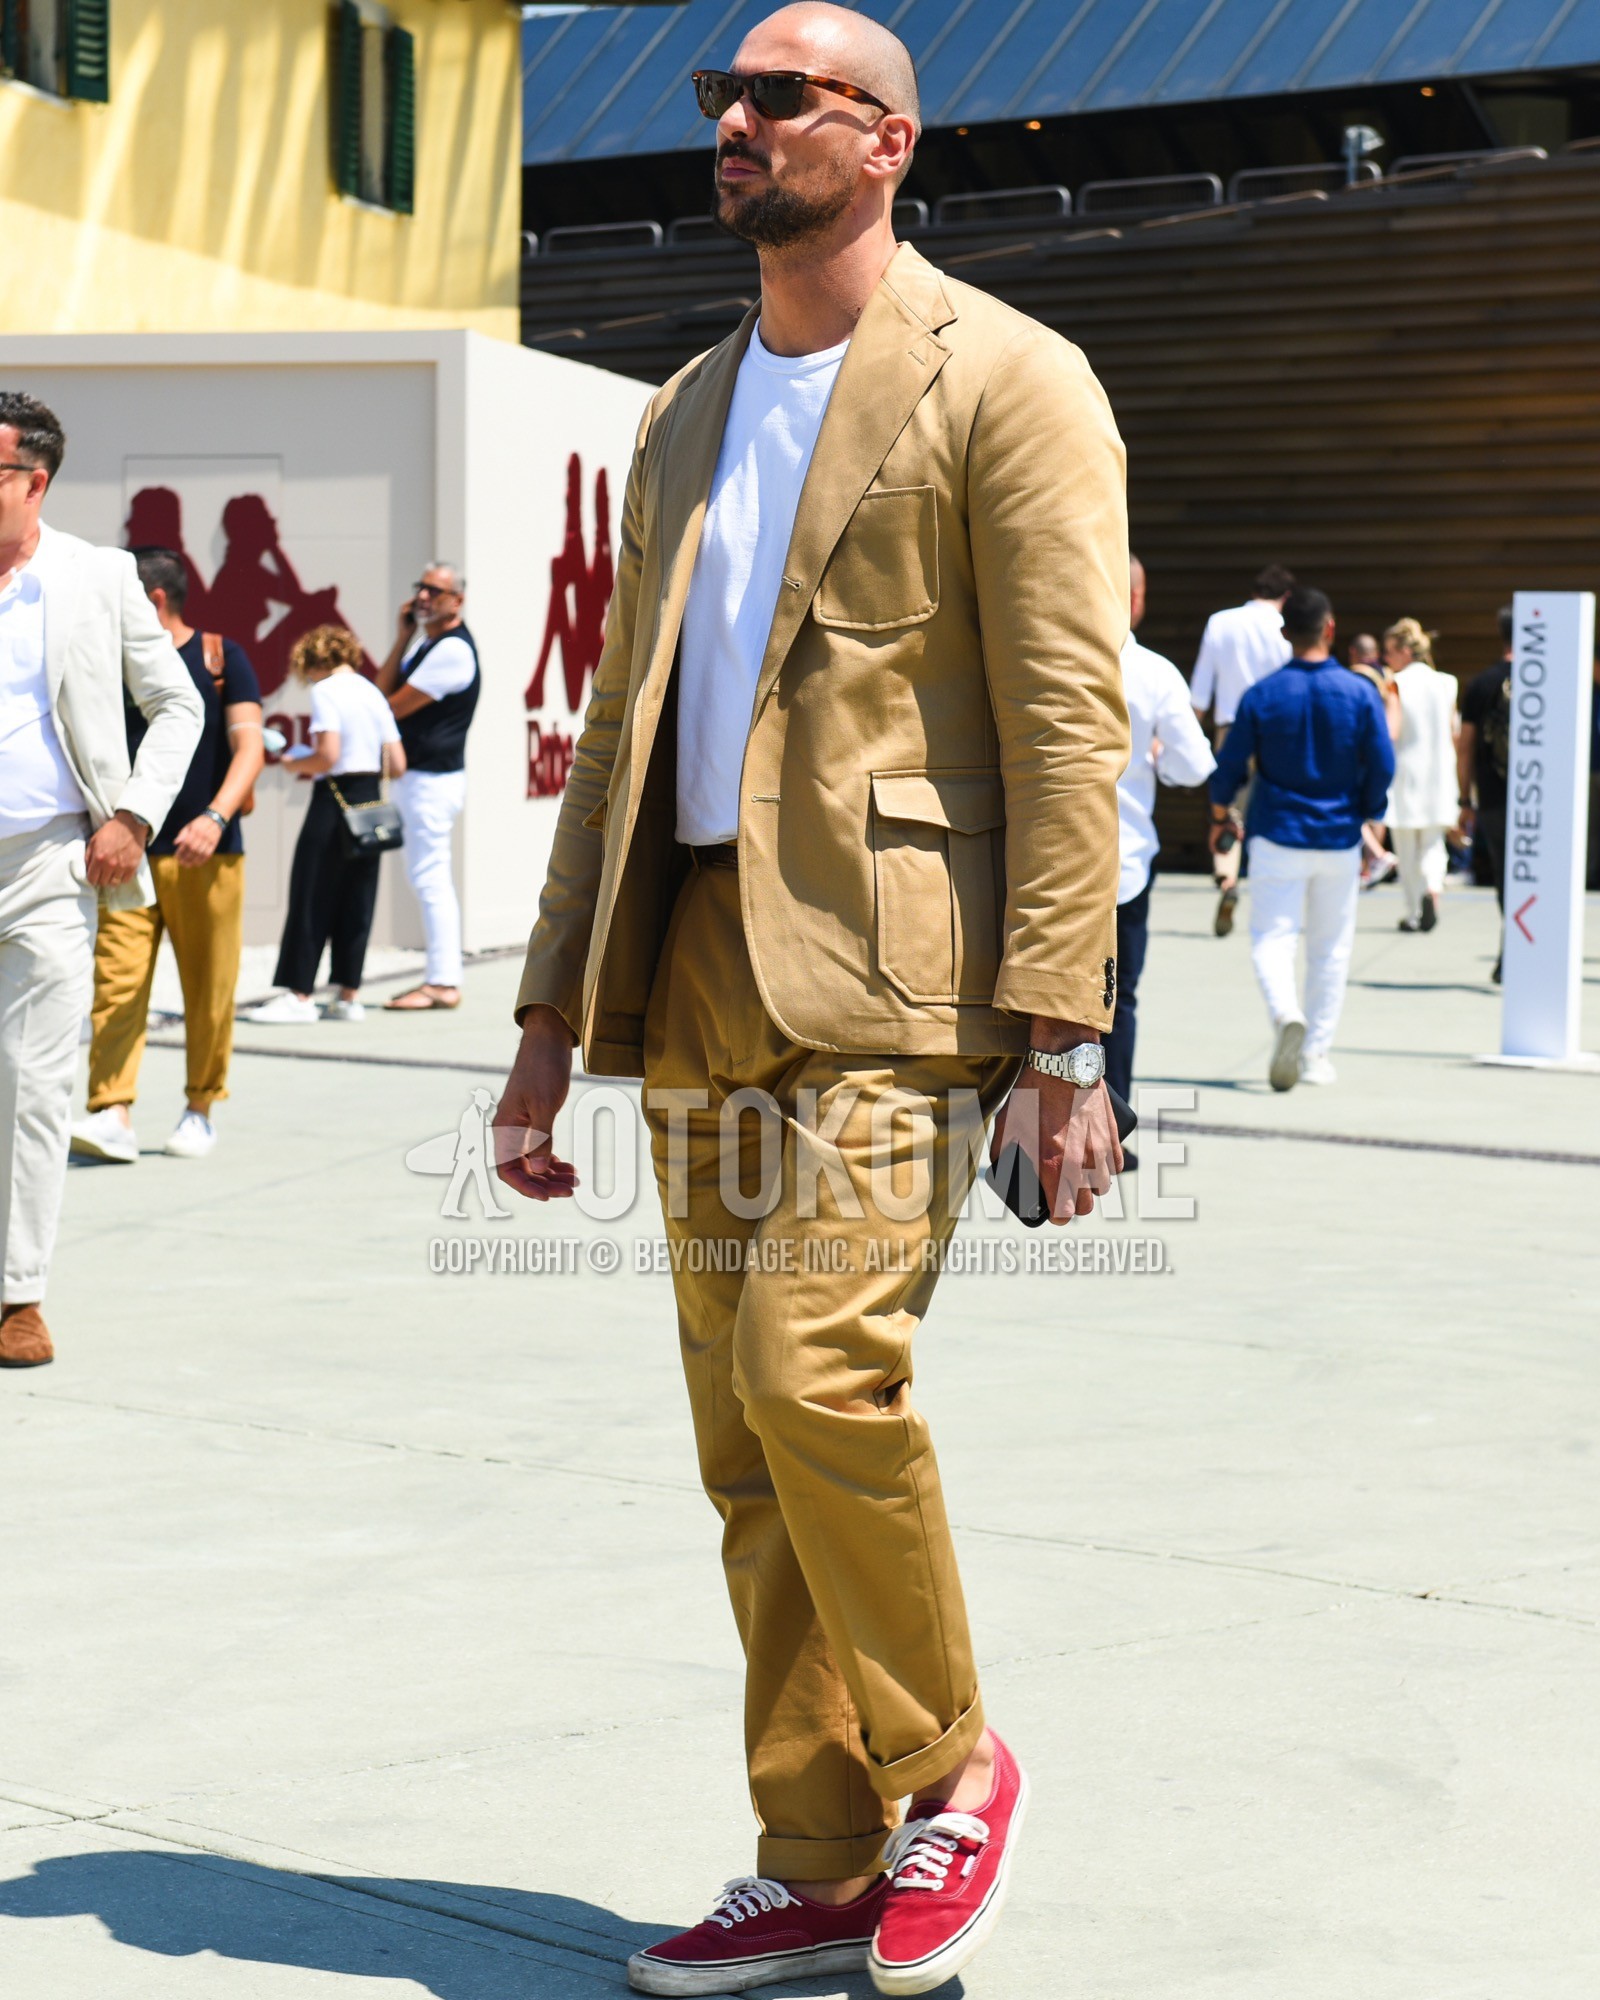 Men's spring summer outfit with brown tortoiseshell sunglasses, white plain t-shirt, brown plain leather belt, red low-cut sneakers, beige plain casual setup.